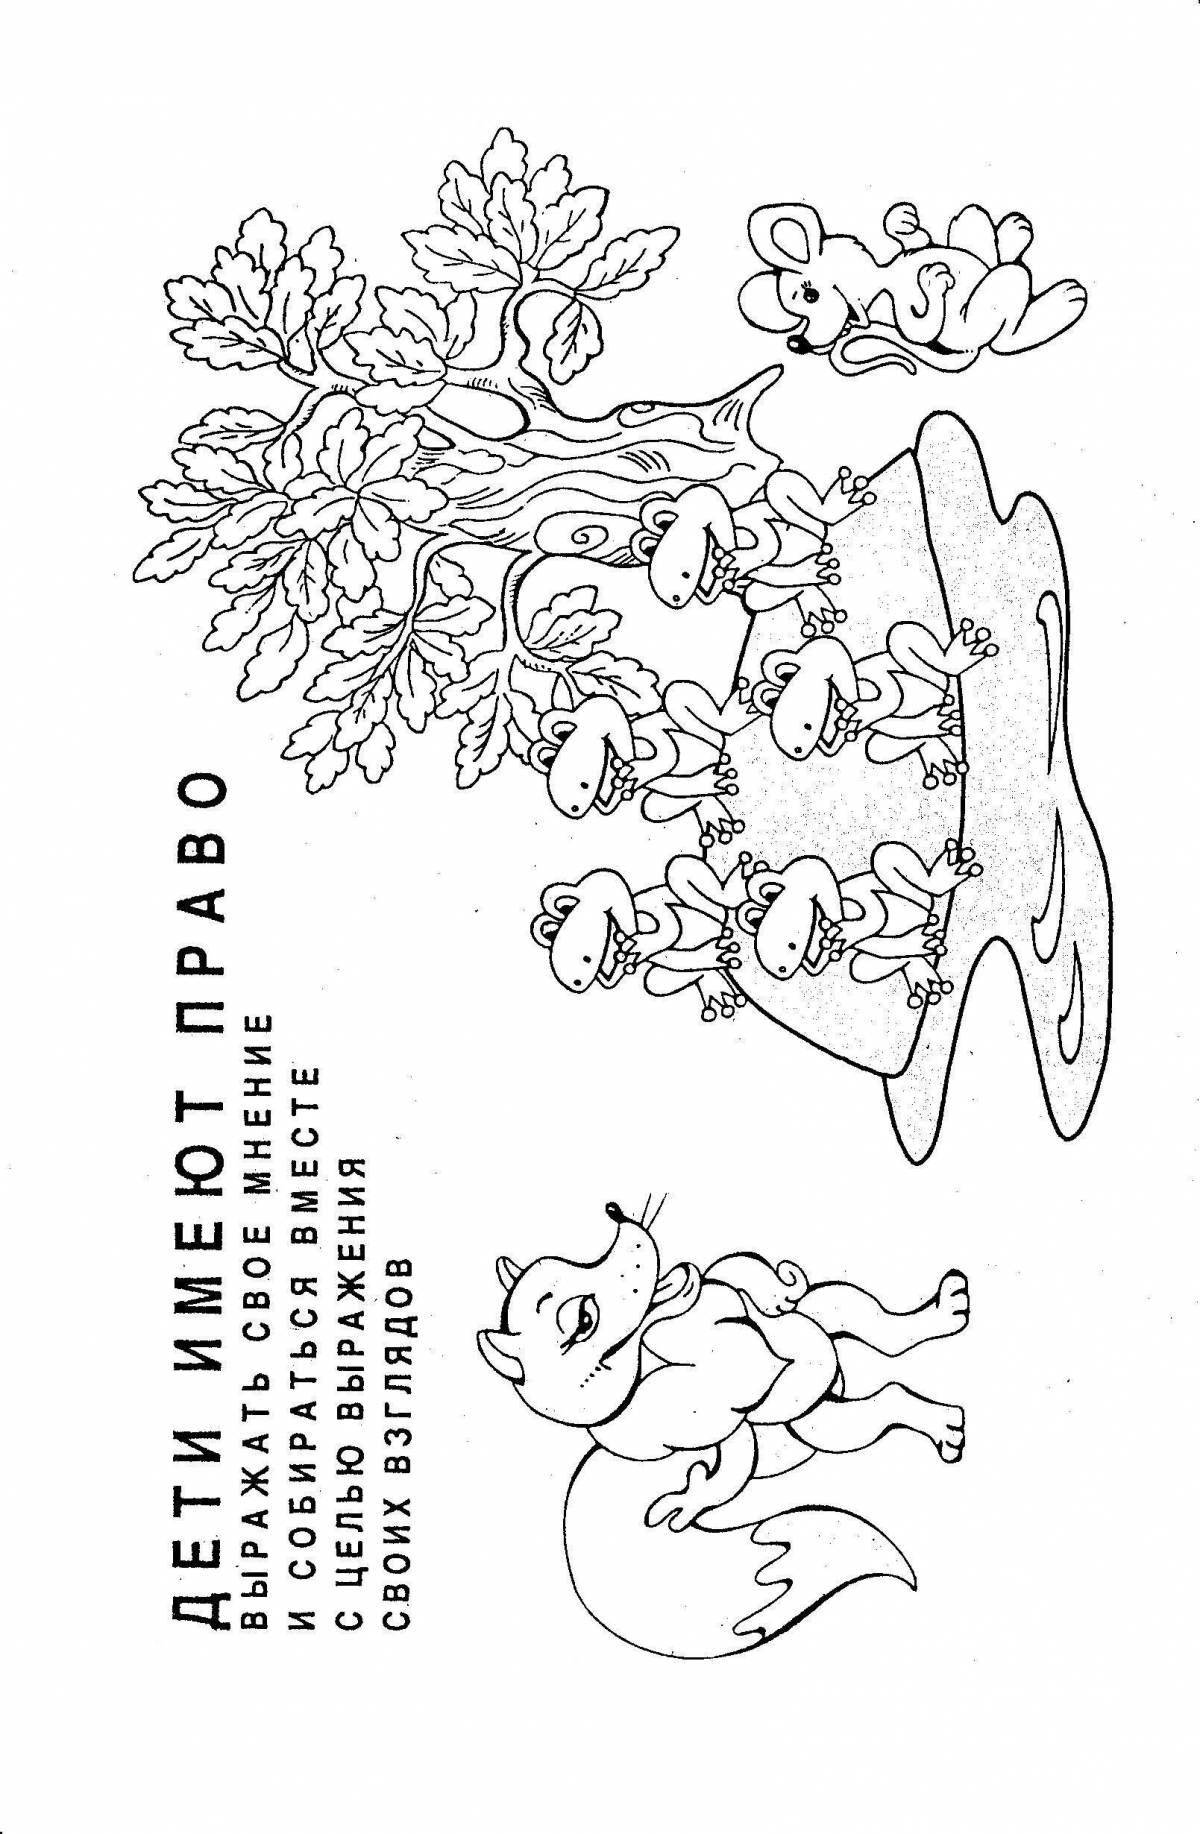 Engaging coloring page my rights and obligations regarding children